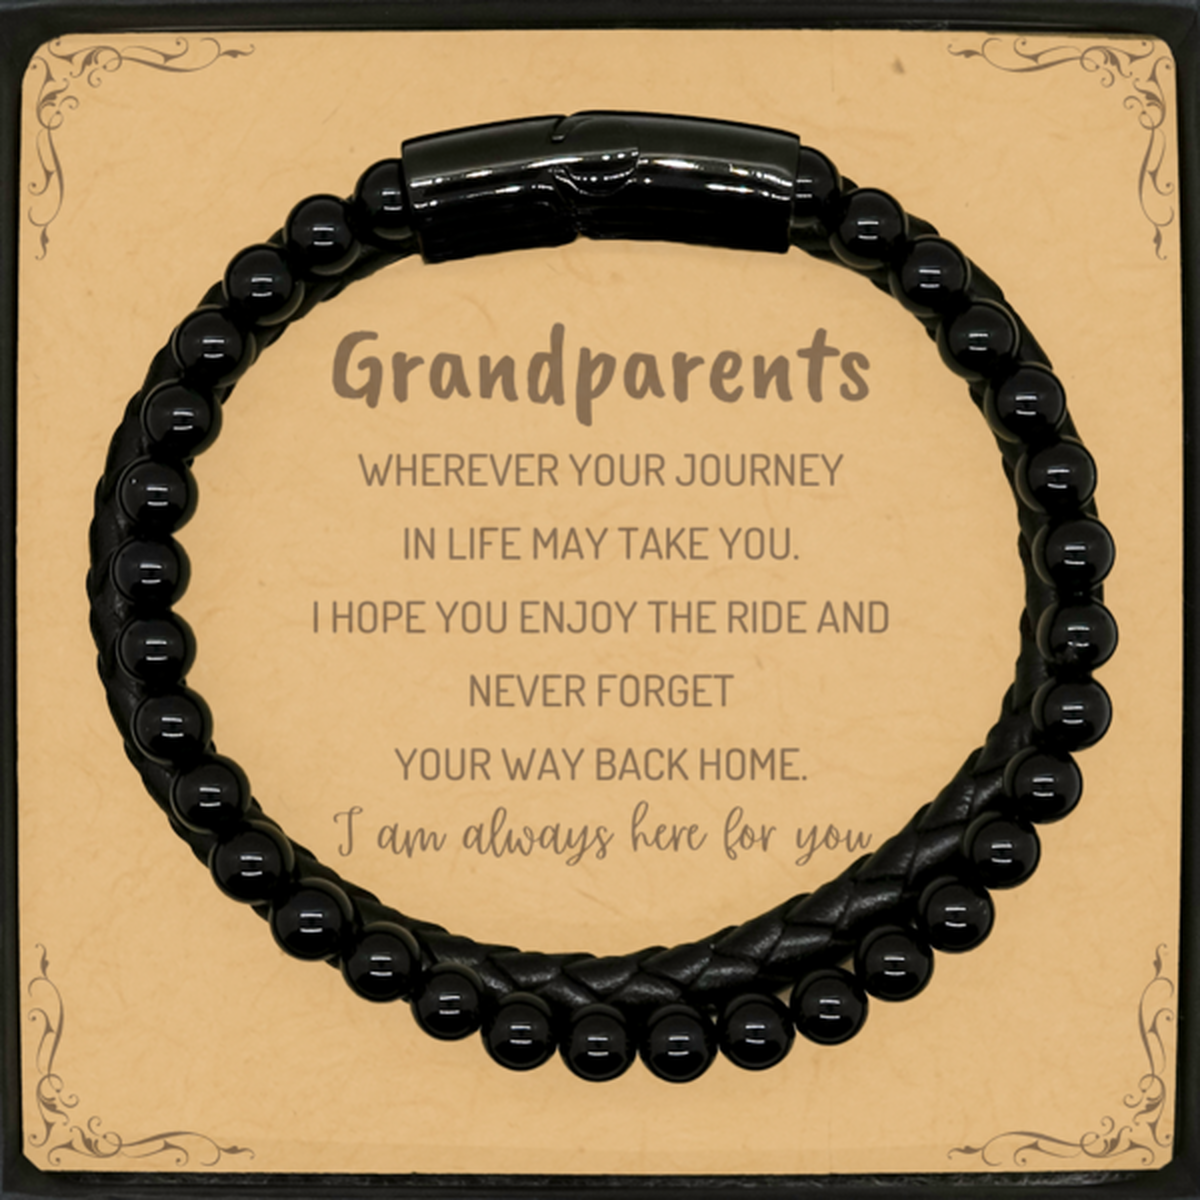 Grandparents wherever your journey in life may take you, I am always here for you Grandparents Stone Leather Bracelets, Awesome Christmas Gifts For Grandparents Message Card, Grandparents Birthday Gifts for Men Women Family Loved One